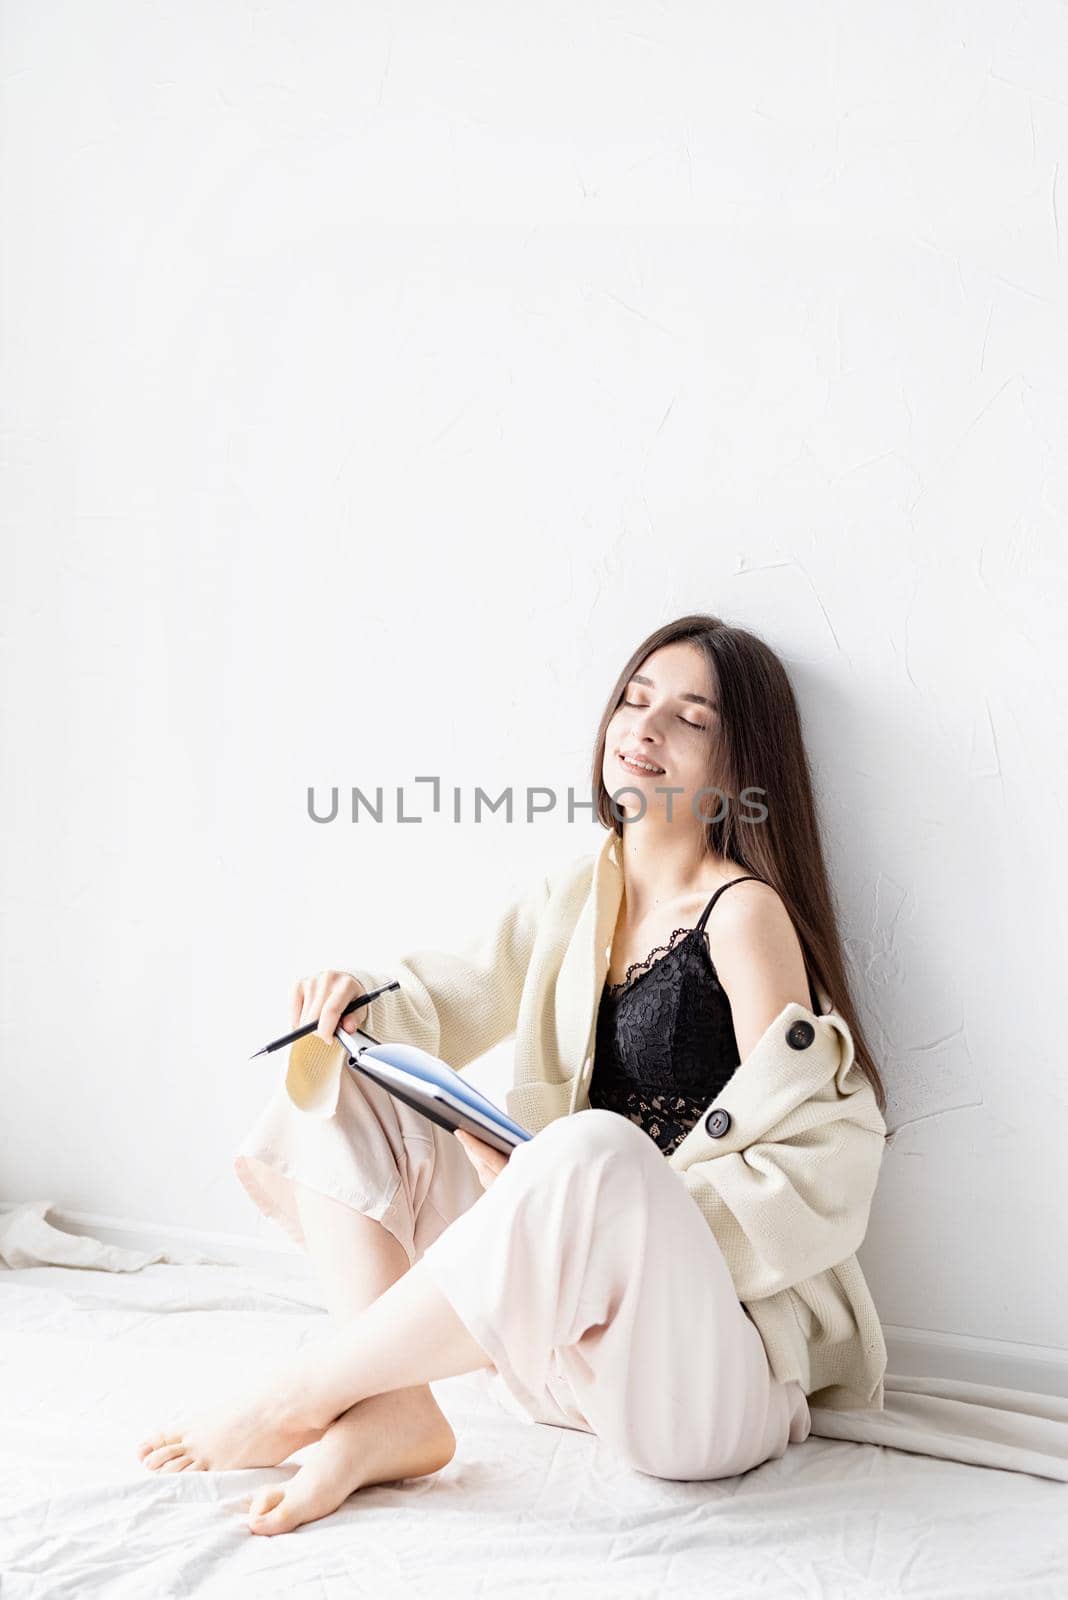 Beautiful woman in comfy home clothes writing notes sitting on the floor dreaming by Desperada